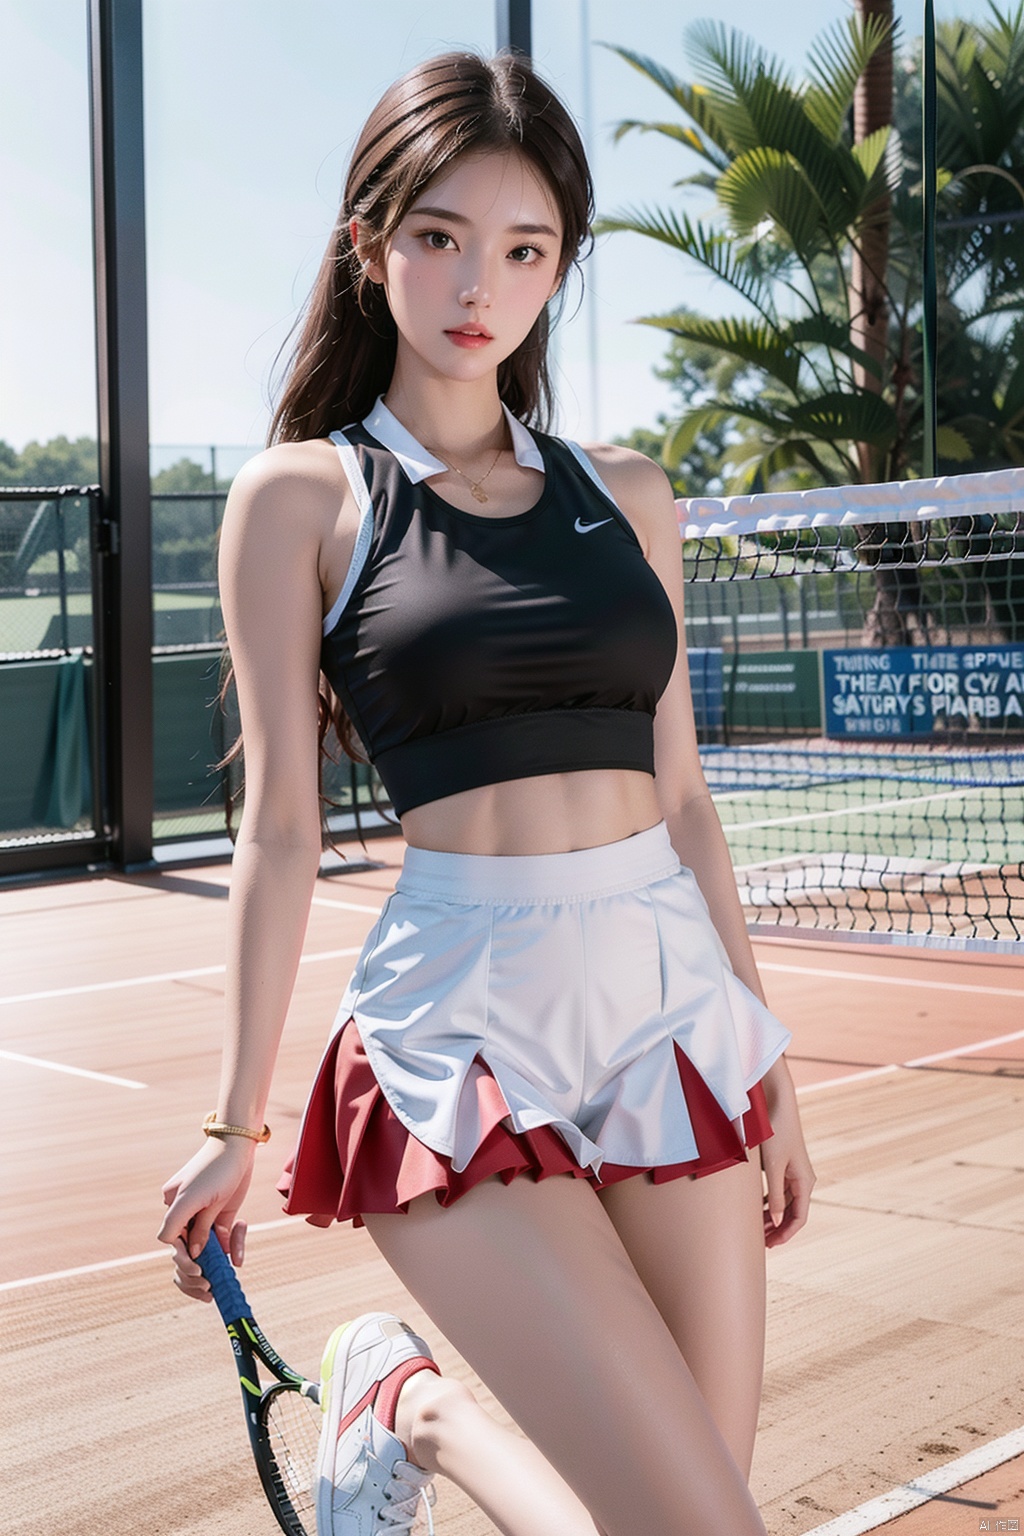 A girl, a tennis girl, wide shoulders, narrow waist, right shoulders, long legs and big breasts, crop gym vest, sports girl, sports skirt, sneakers, bare legs, wearing a fitness bracelet, tennis racket in hand, playing on a tennis court, add muscle, add detail, add background, muscle girl, add playing action, deep cleavage,